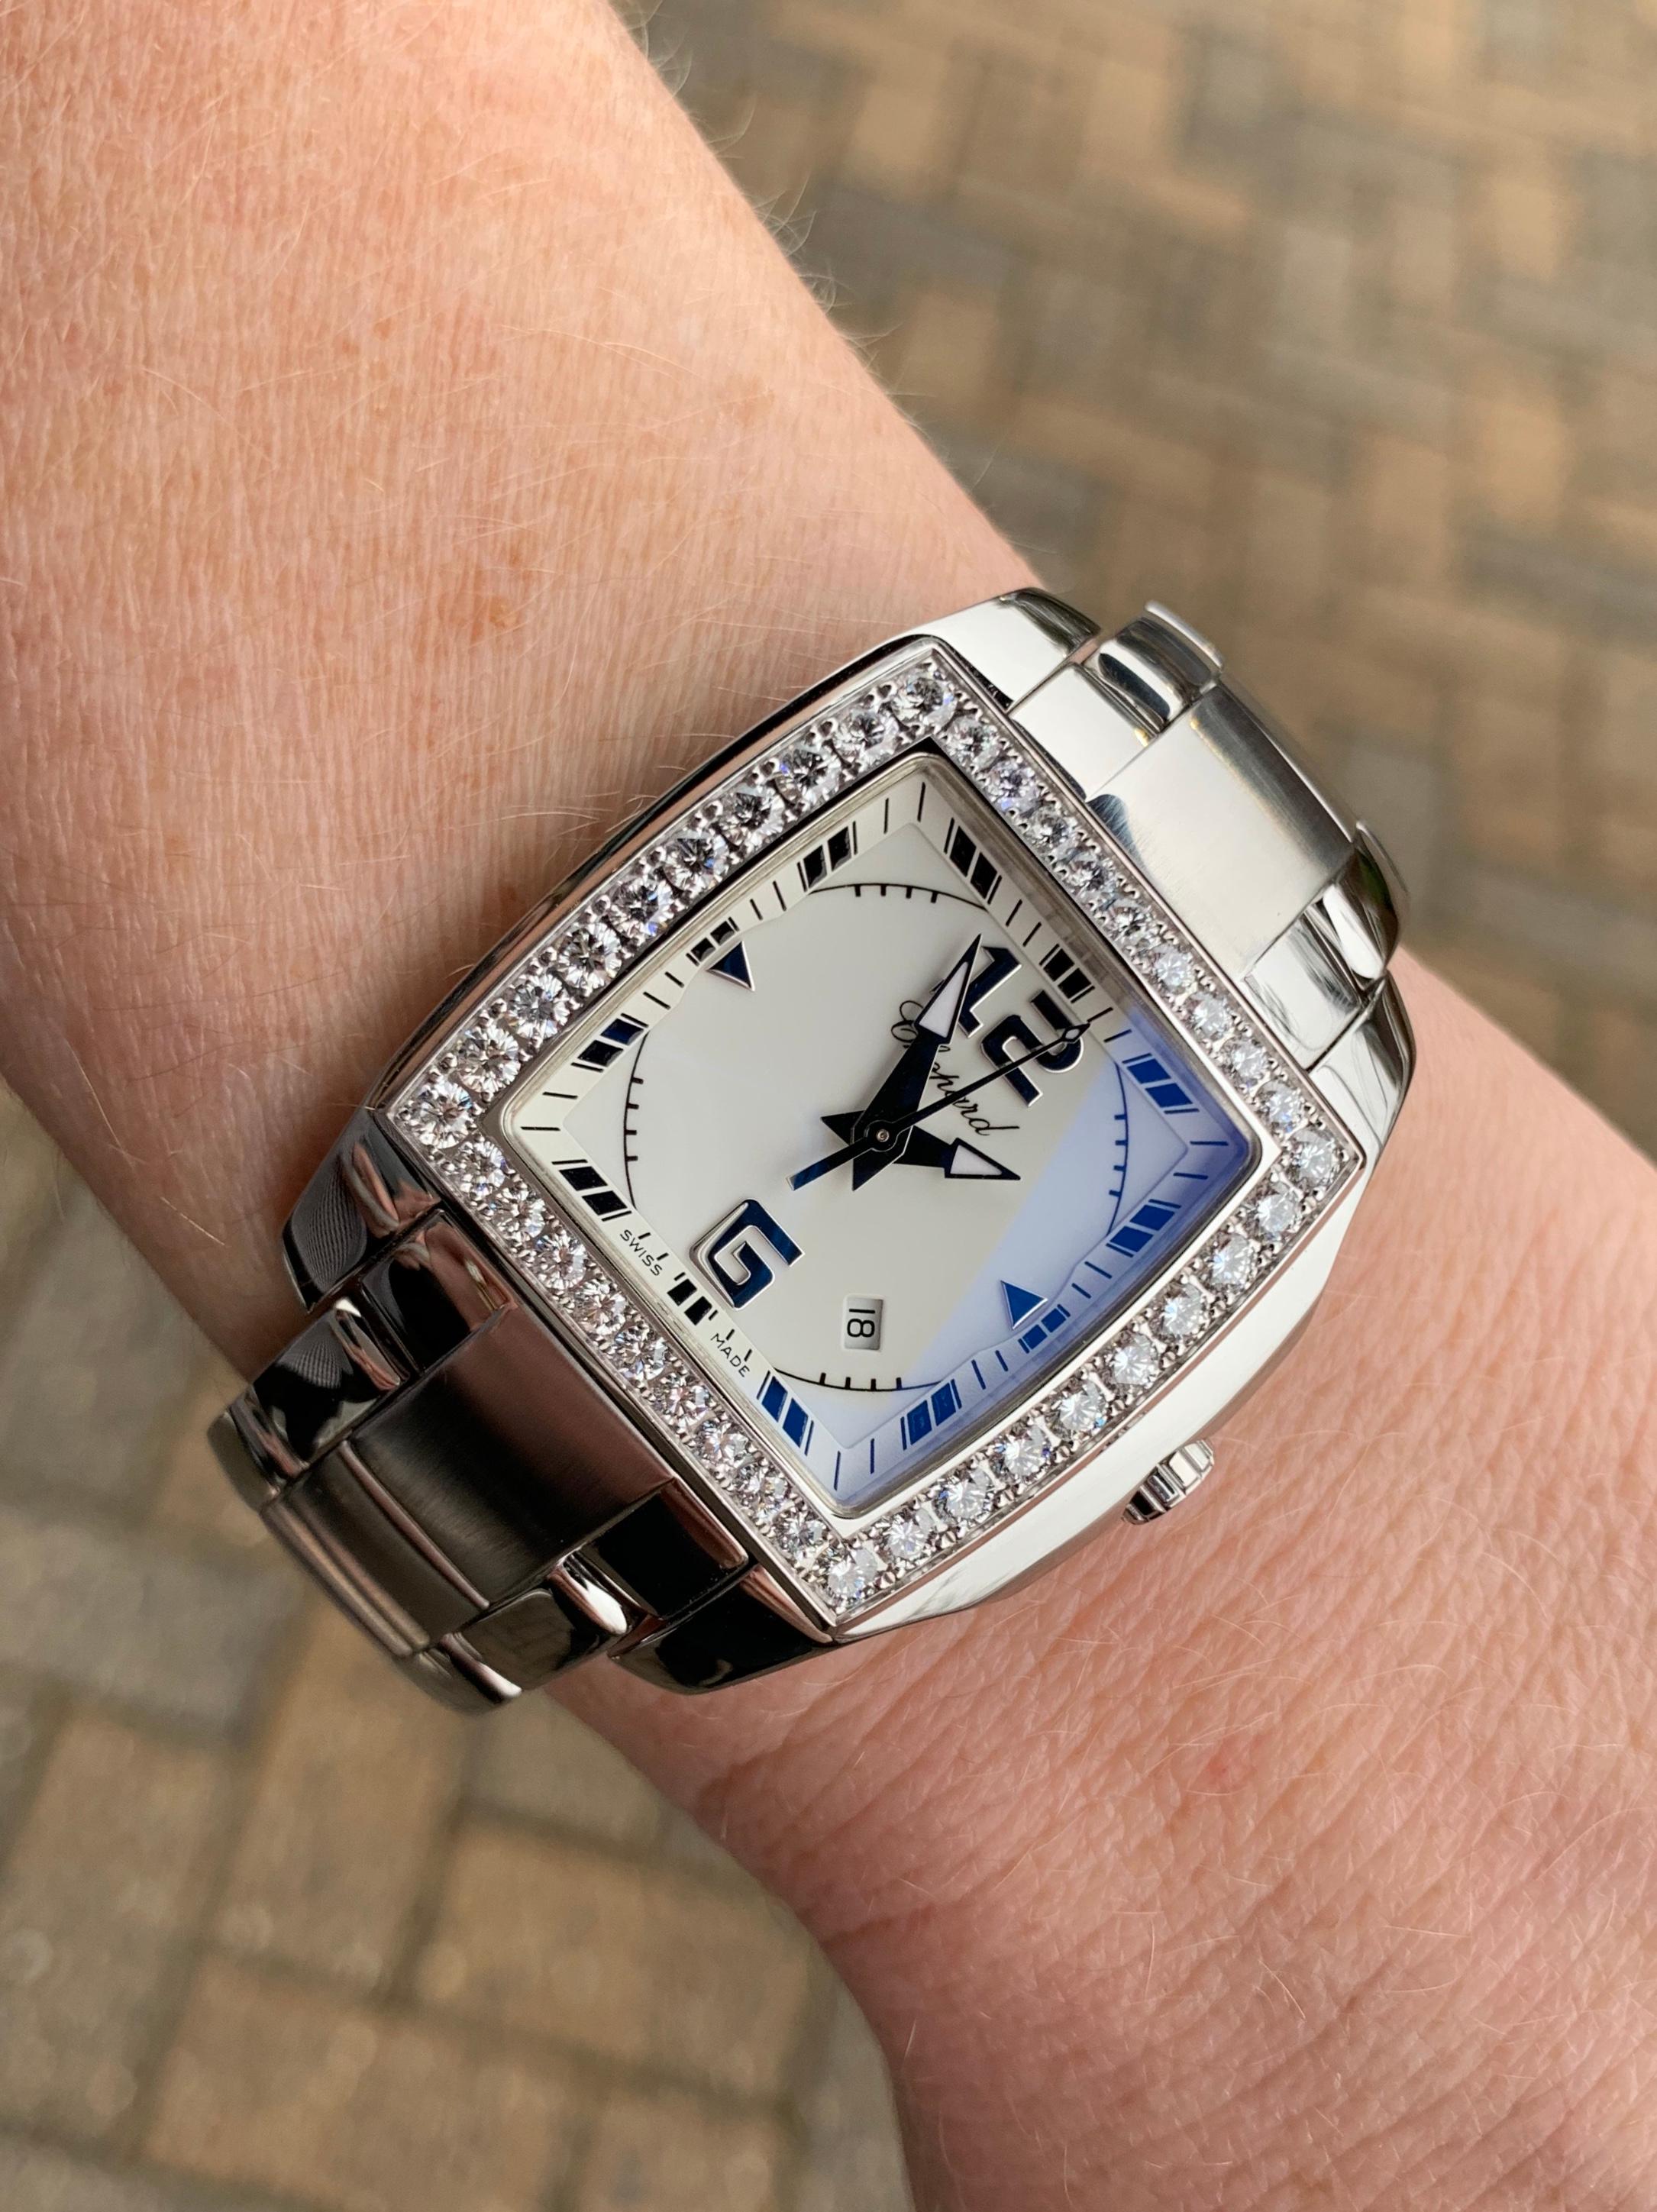 An iconic design by Chopard, the Two-O-Ten timepiece with 18k white gold case adorned with 38 round brilliant diamonds on the bezel at 1.87 carats total weight. Diamond quality is colorless and eye clean. Watch case is an attractive tonneau shape